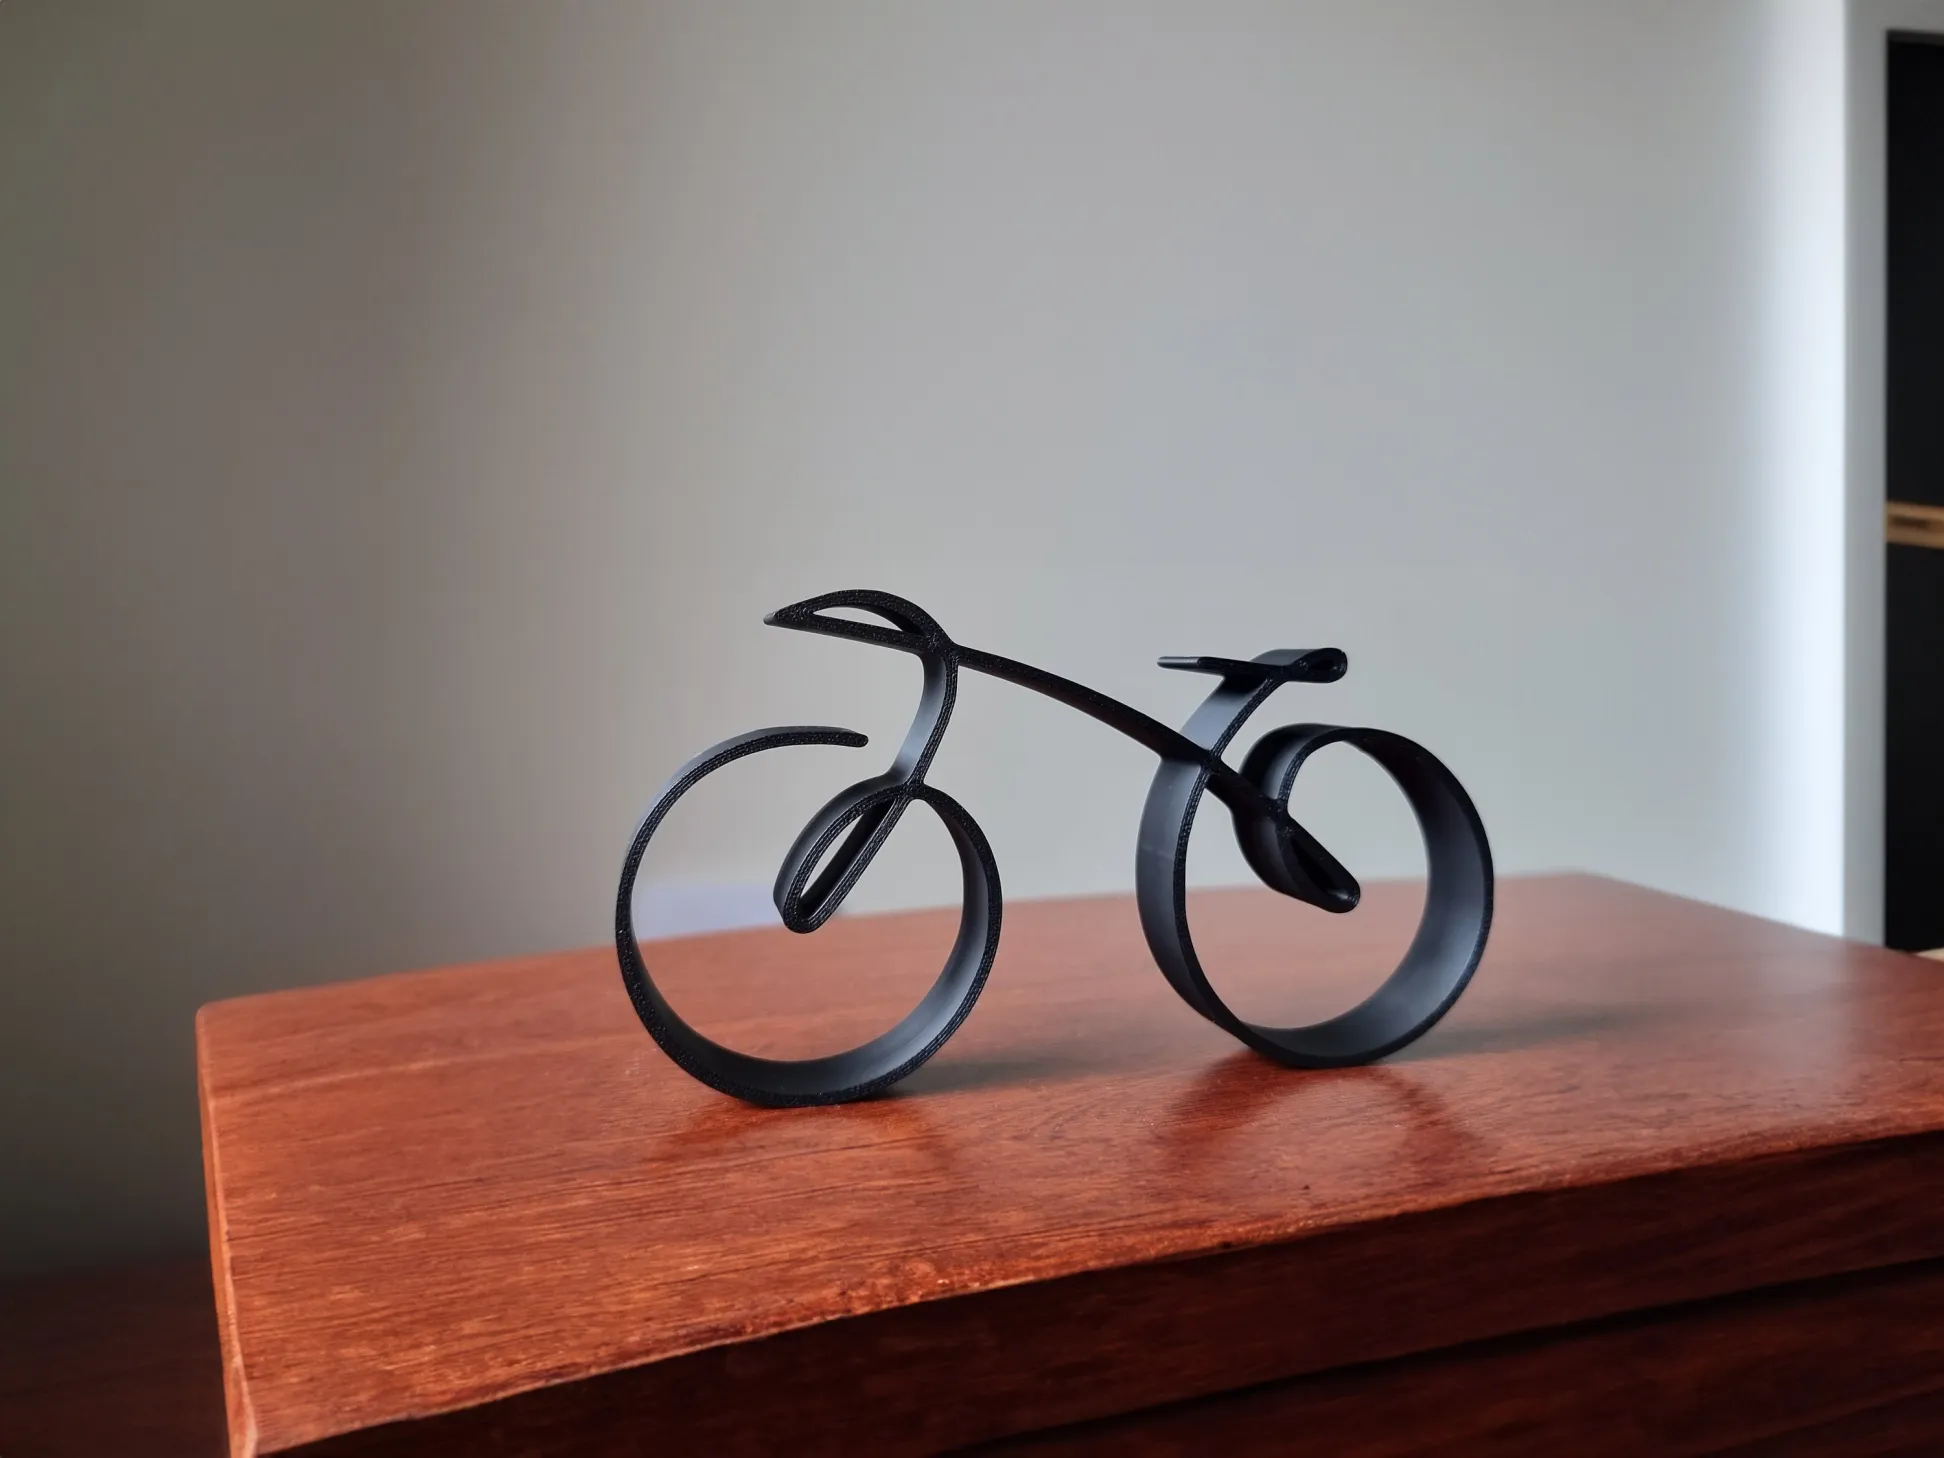 MINIMALISTIC BICYCLE SCULPTURE WIRE FRAMED STYLE